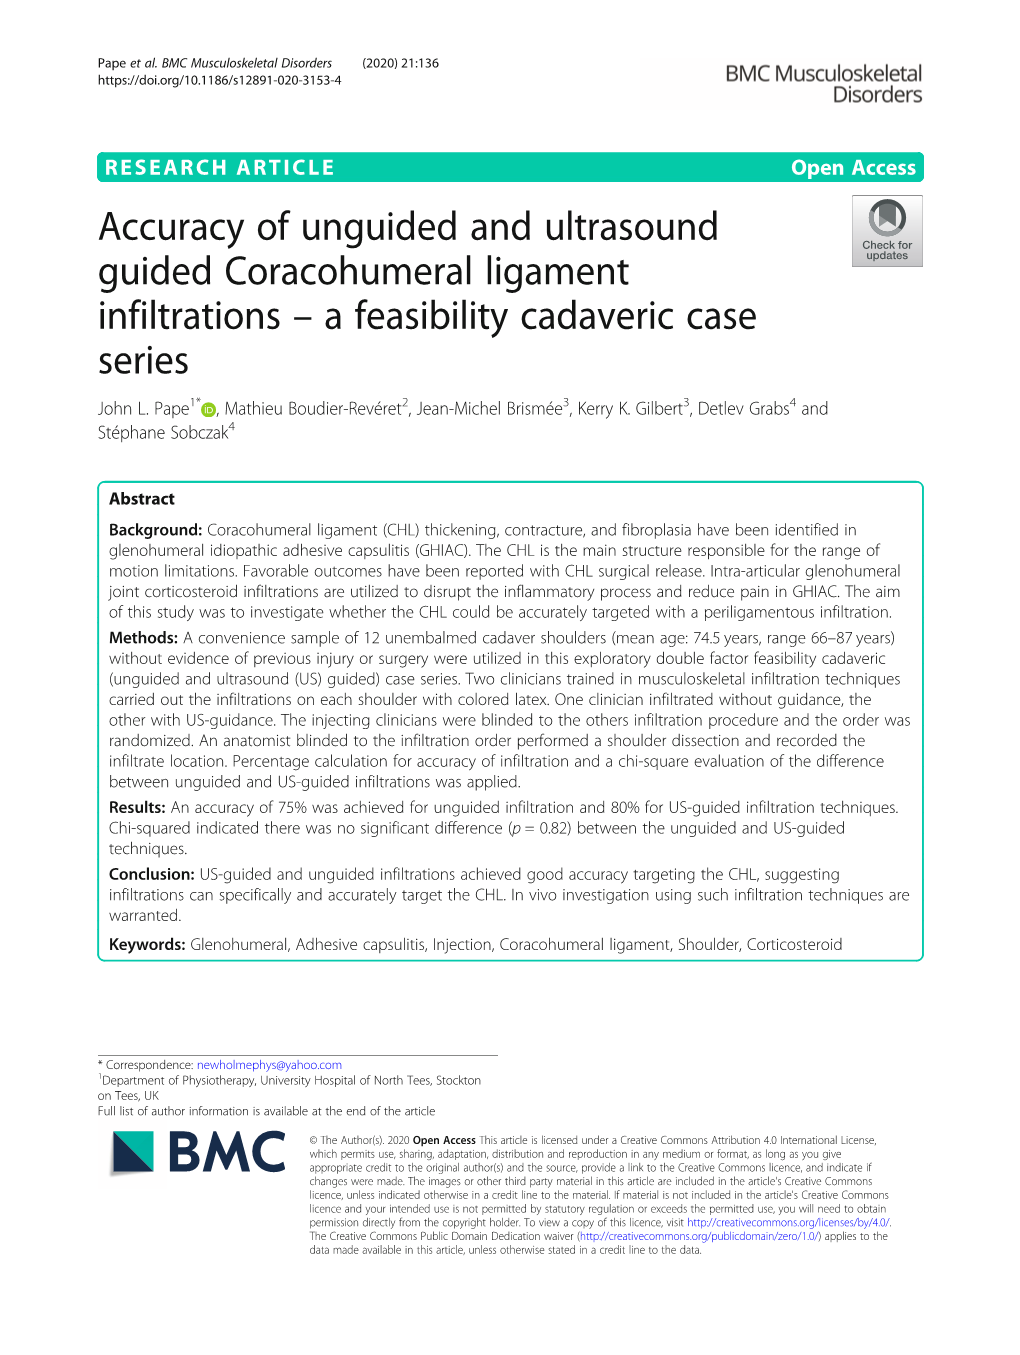 Accuracy of Unguided and Ultrasound Guided Coracohumeral Ligament Infiltrations – a Feasibility Cadaveric Case Series John L